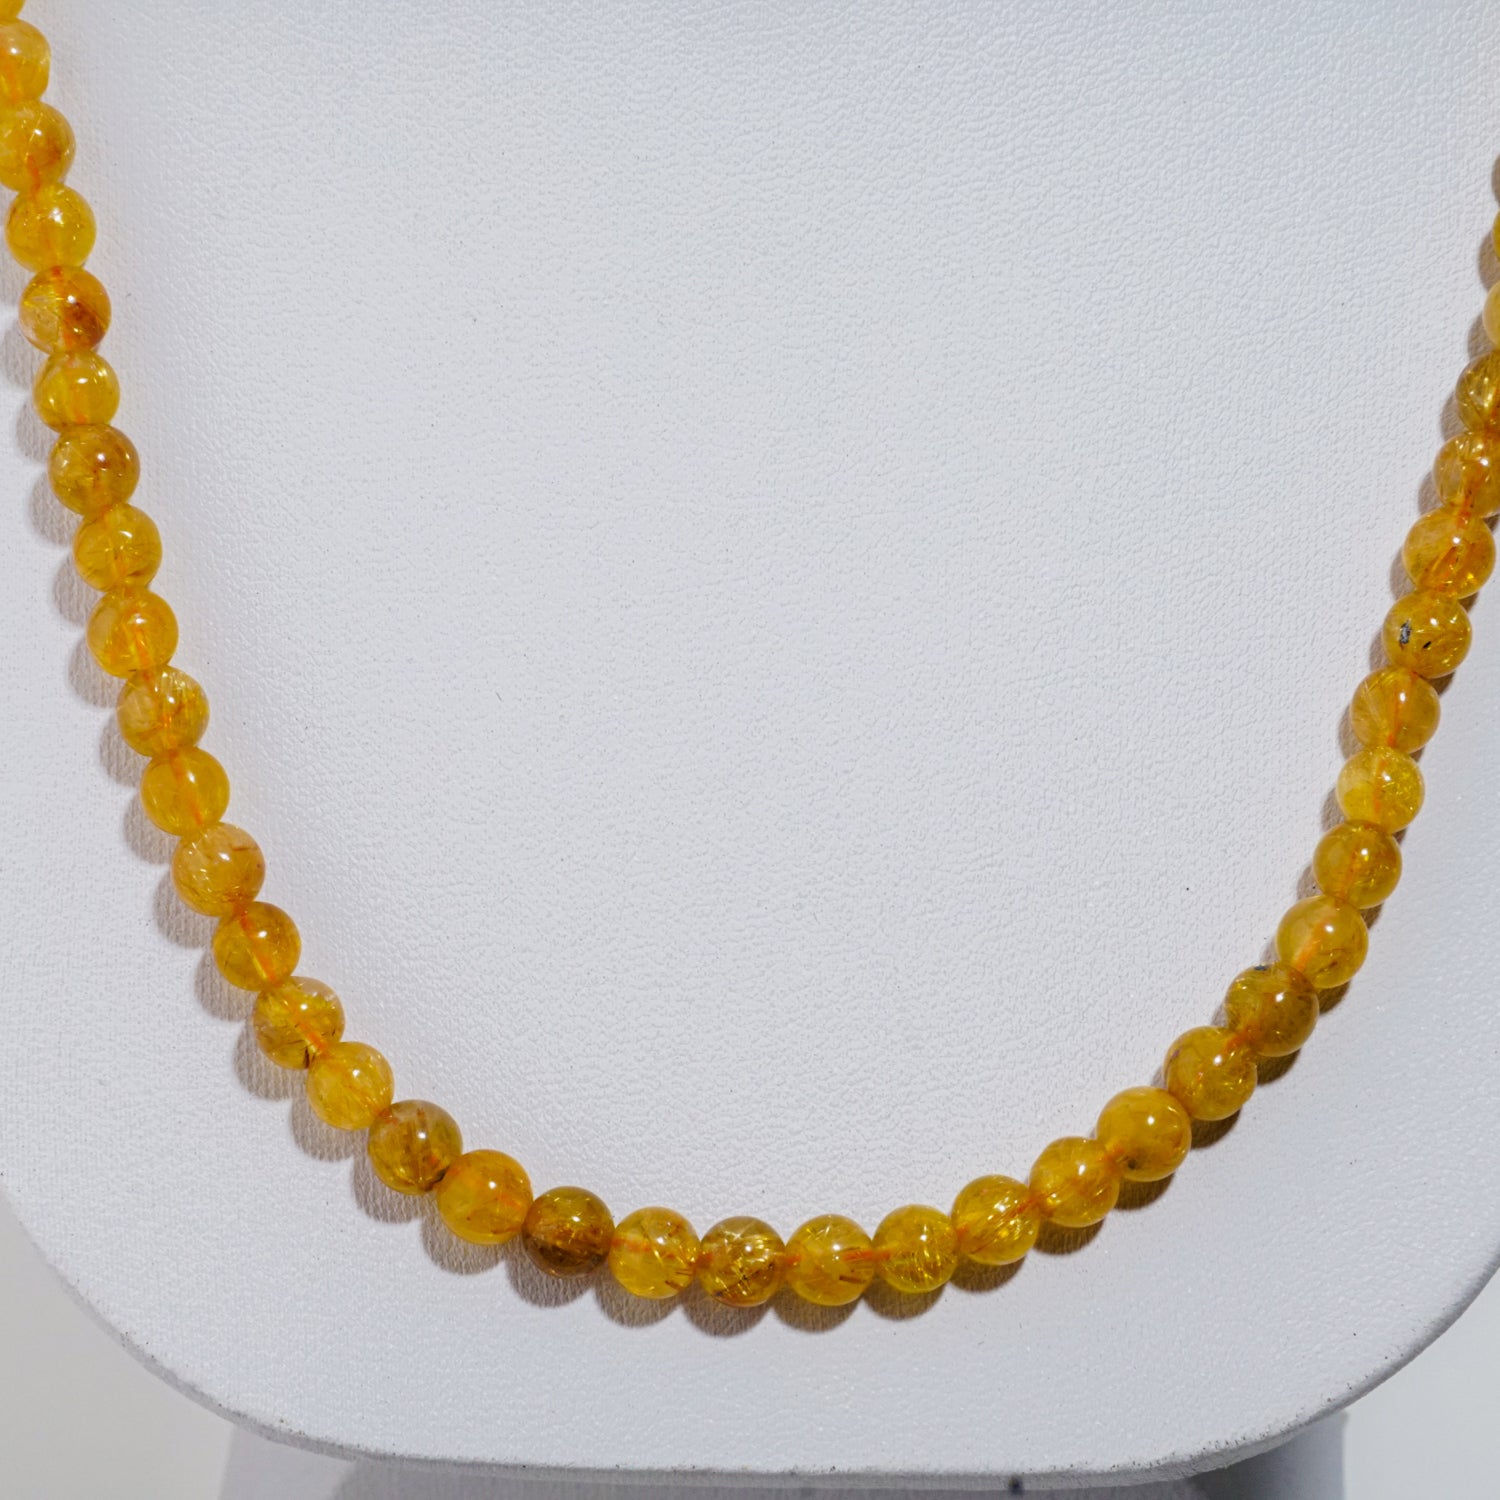 Genuine Citrine 5mm Beaded 22 inch Necklace on Elastic Cord